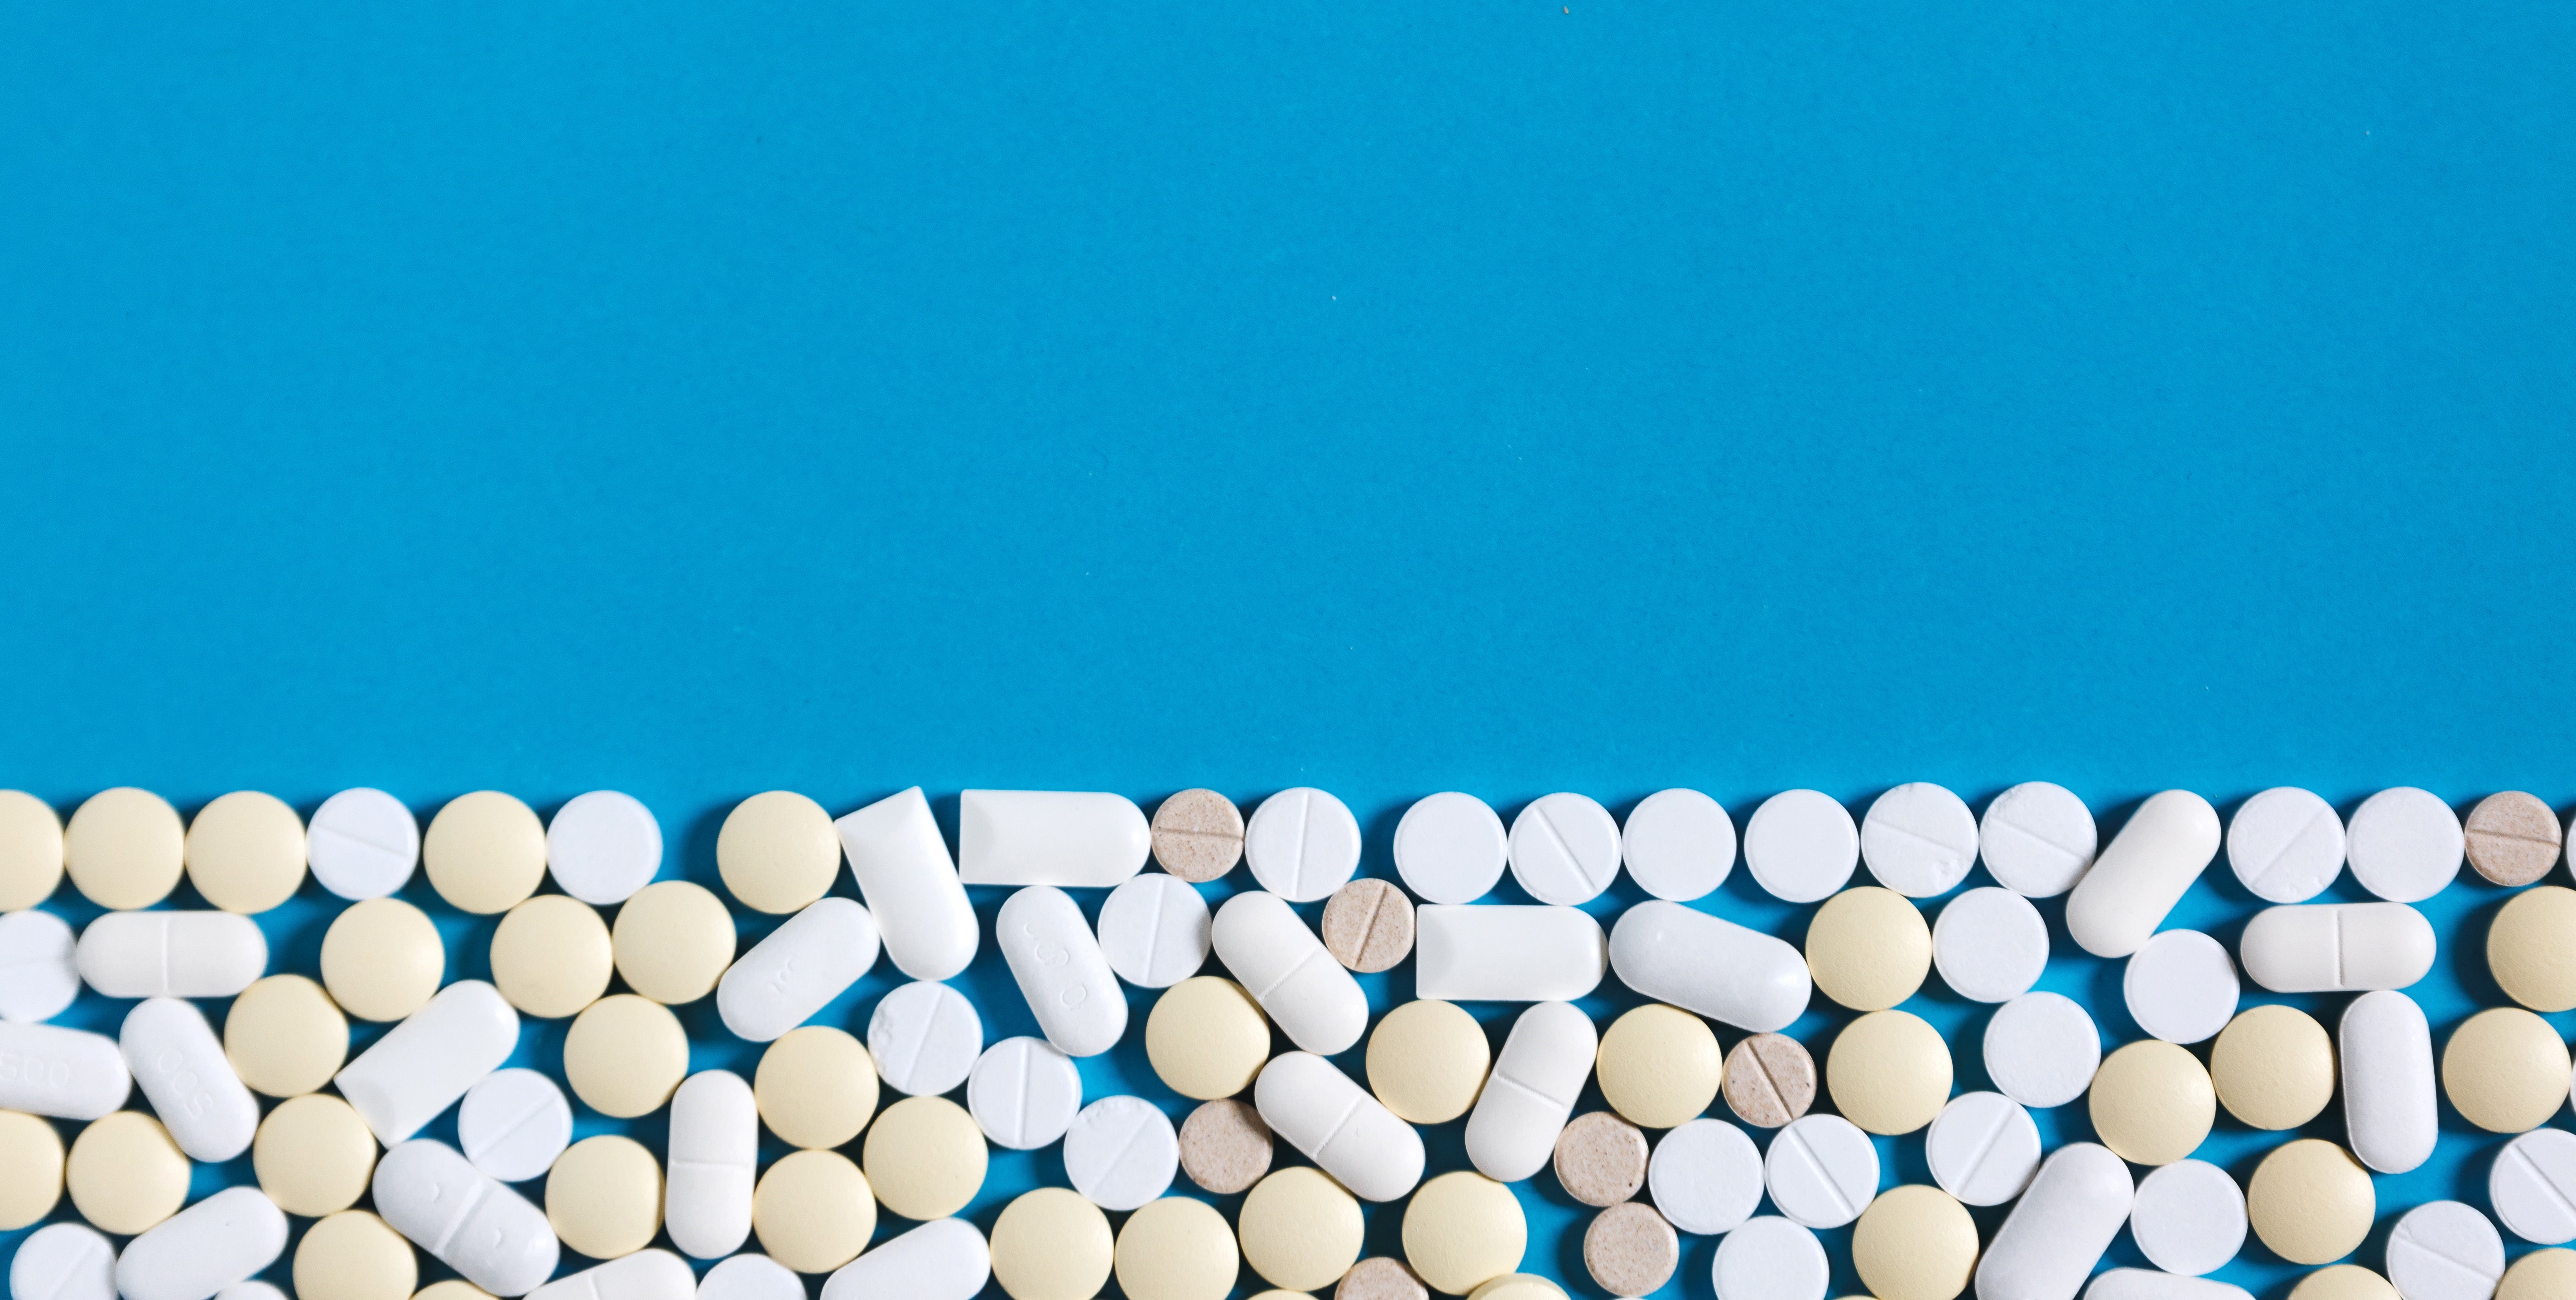 Government regulated or negotiated drug prices: Key design